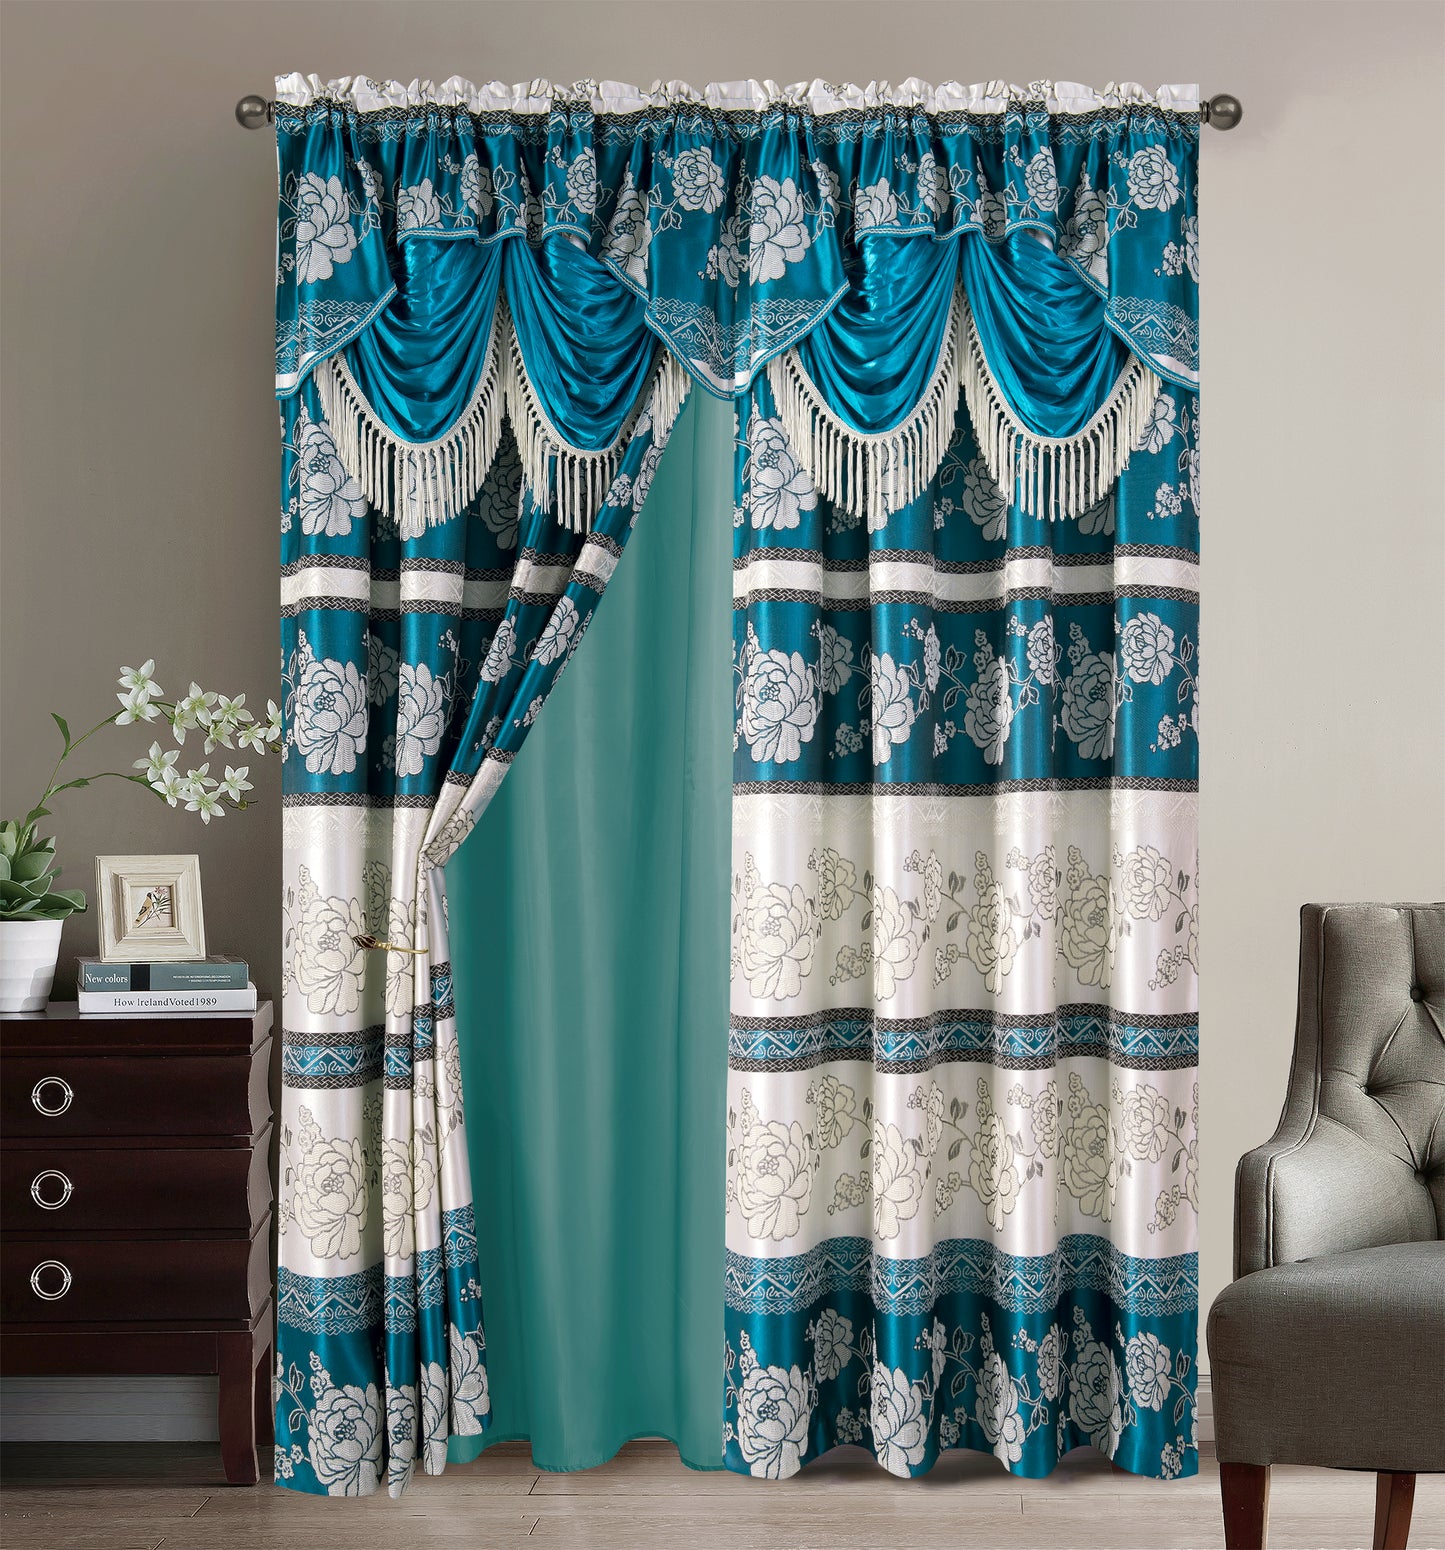 2PC CURTAIN SET W/ ATTACHED VALANCE & BACKING - Bonnie